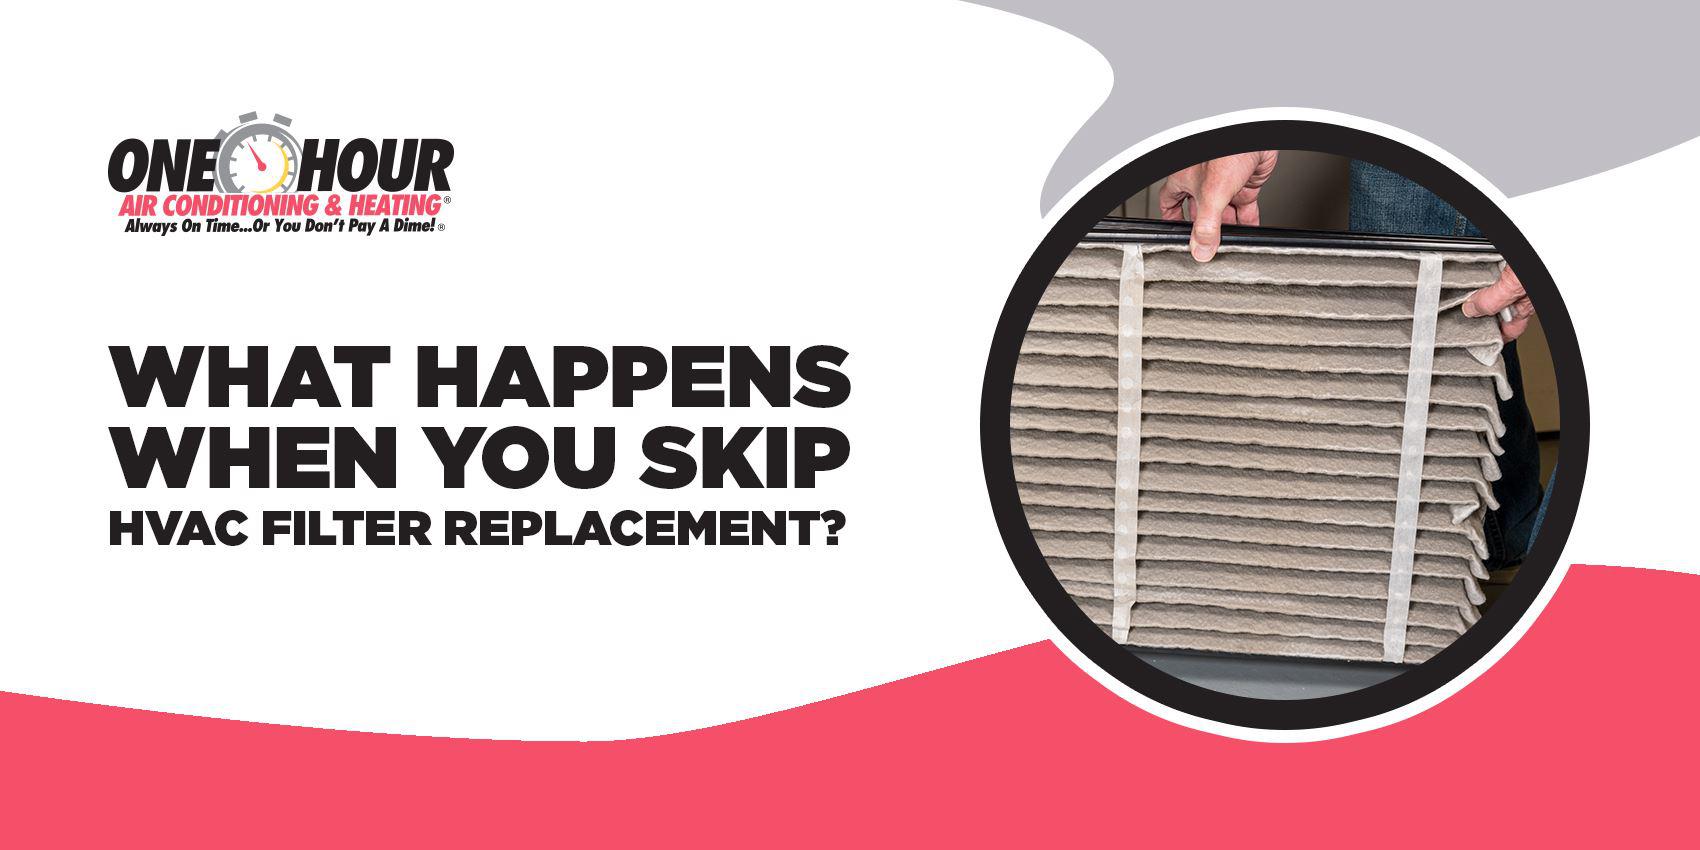 What Happens When You Skip HVAC Filter Replacement?